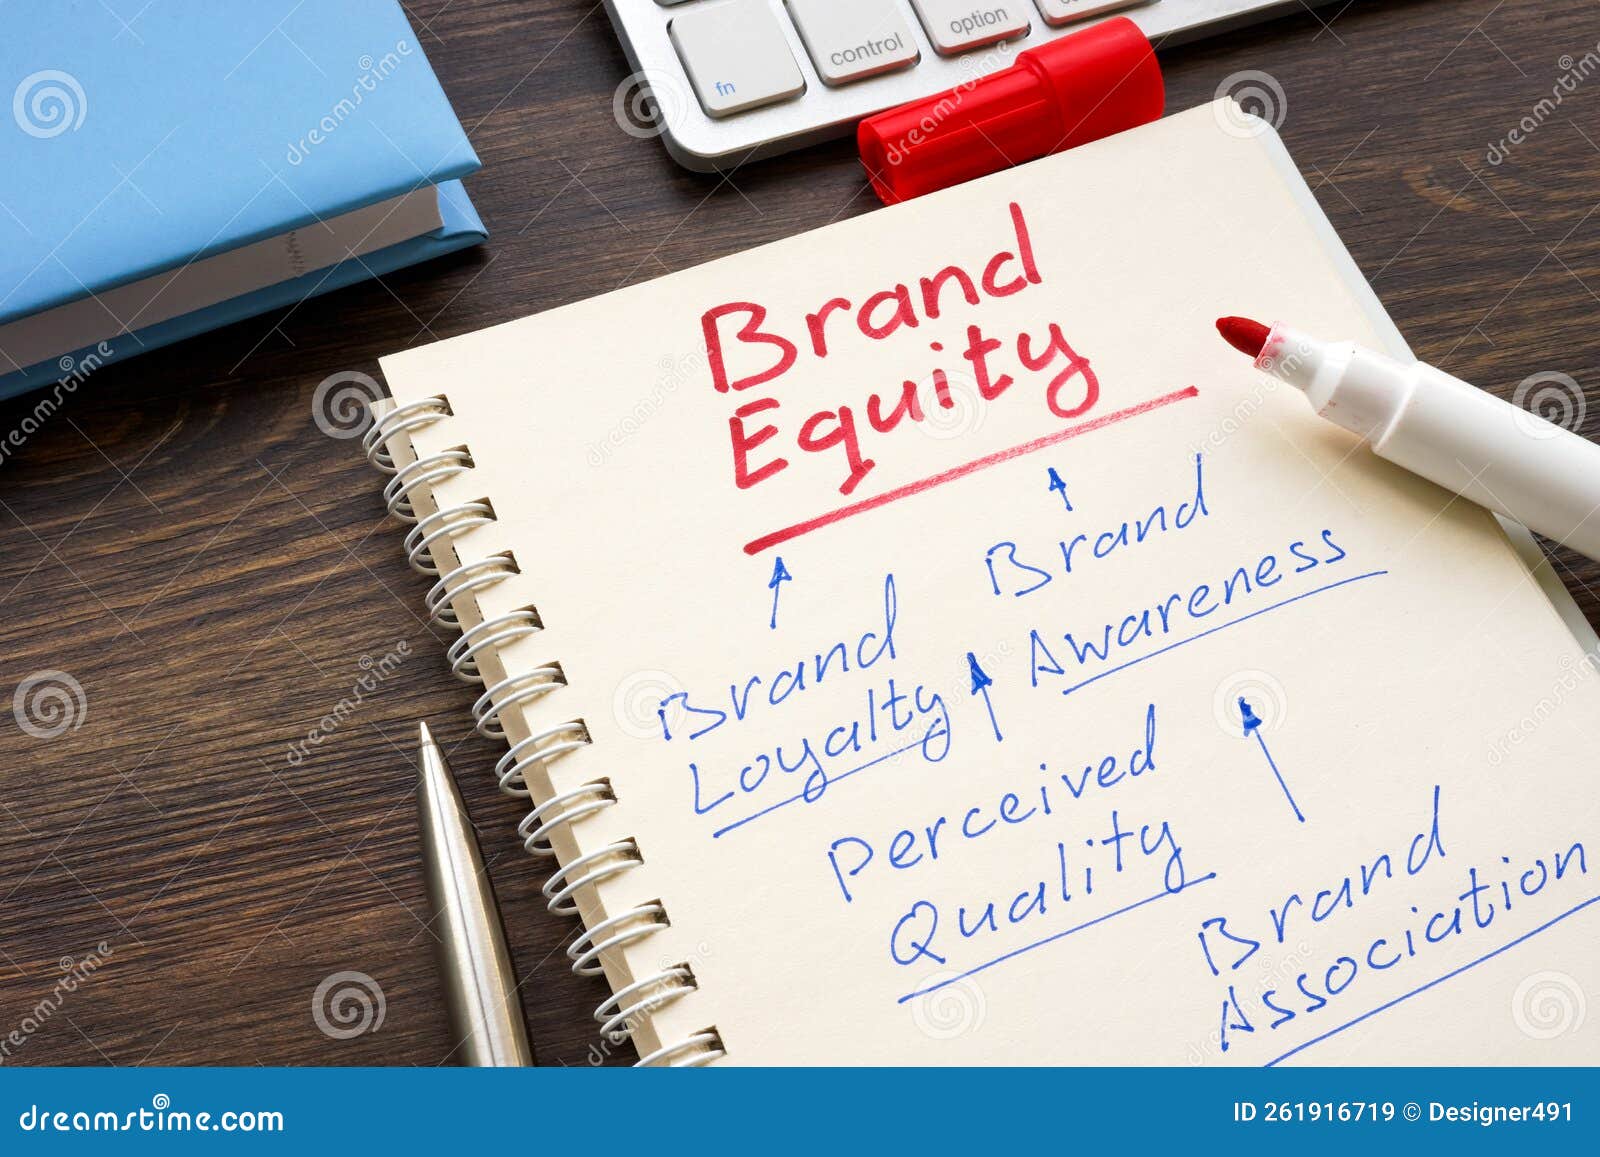 marks in the notepad about brand equity.